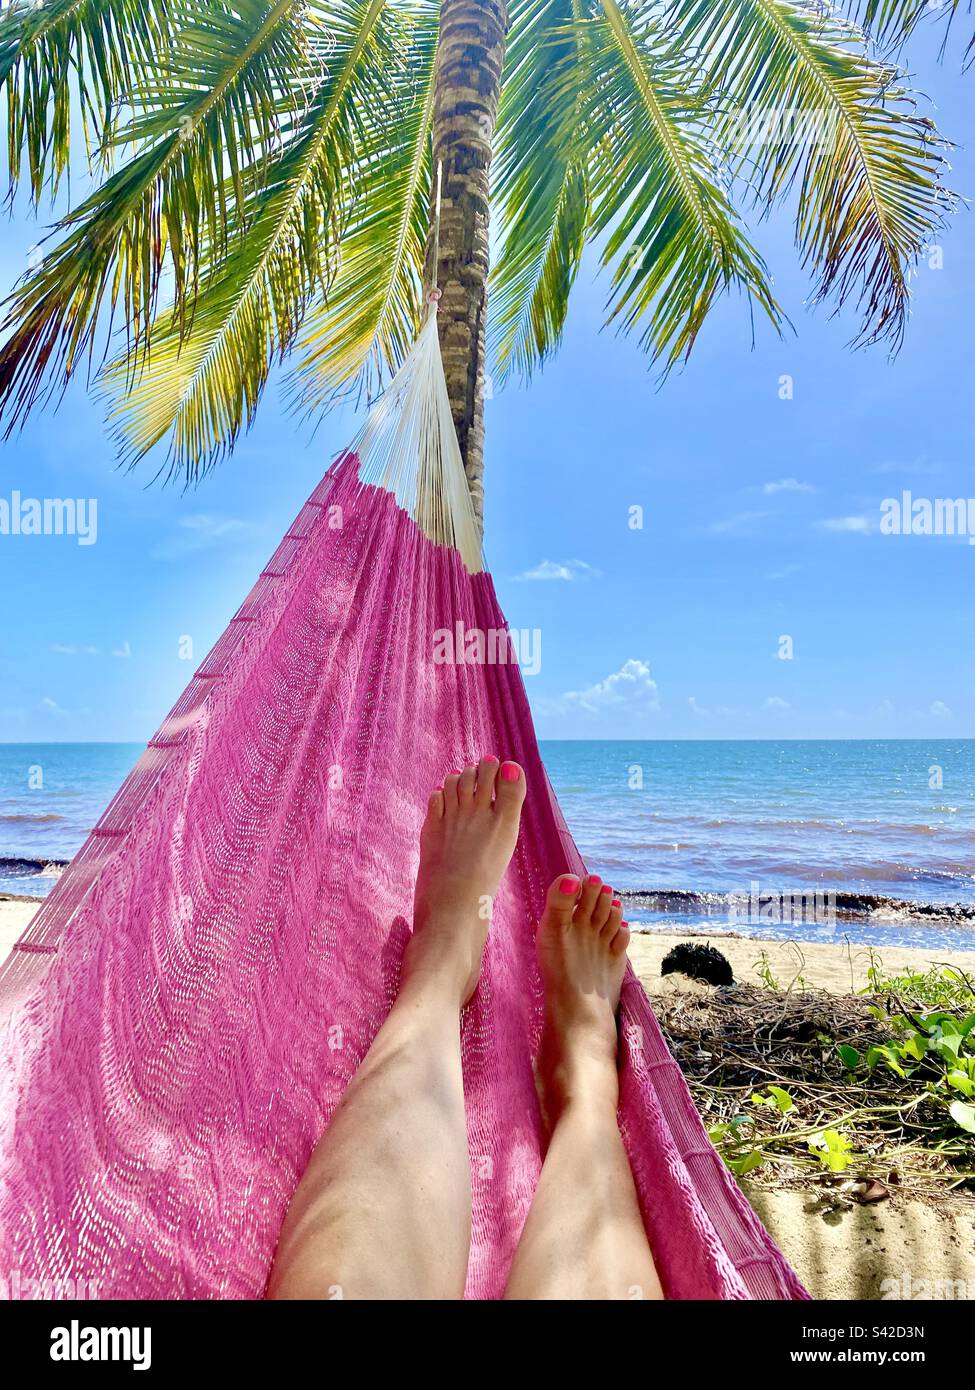 Hammock view at a beach in Hopkins, Belize Stock Photo